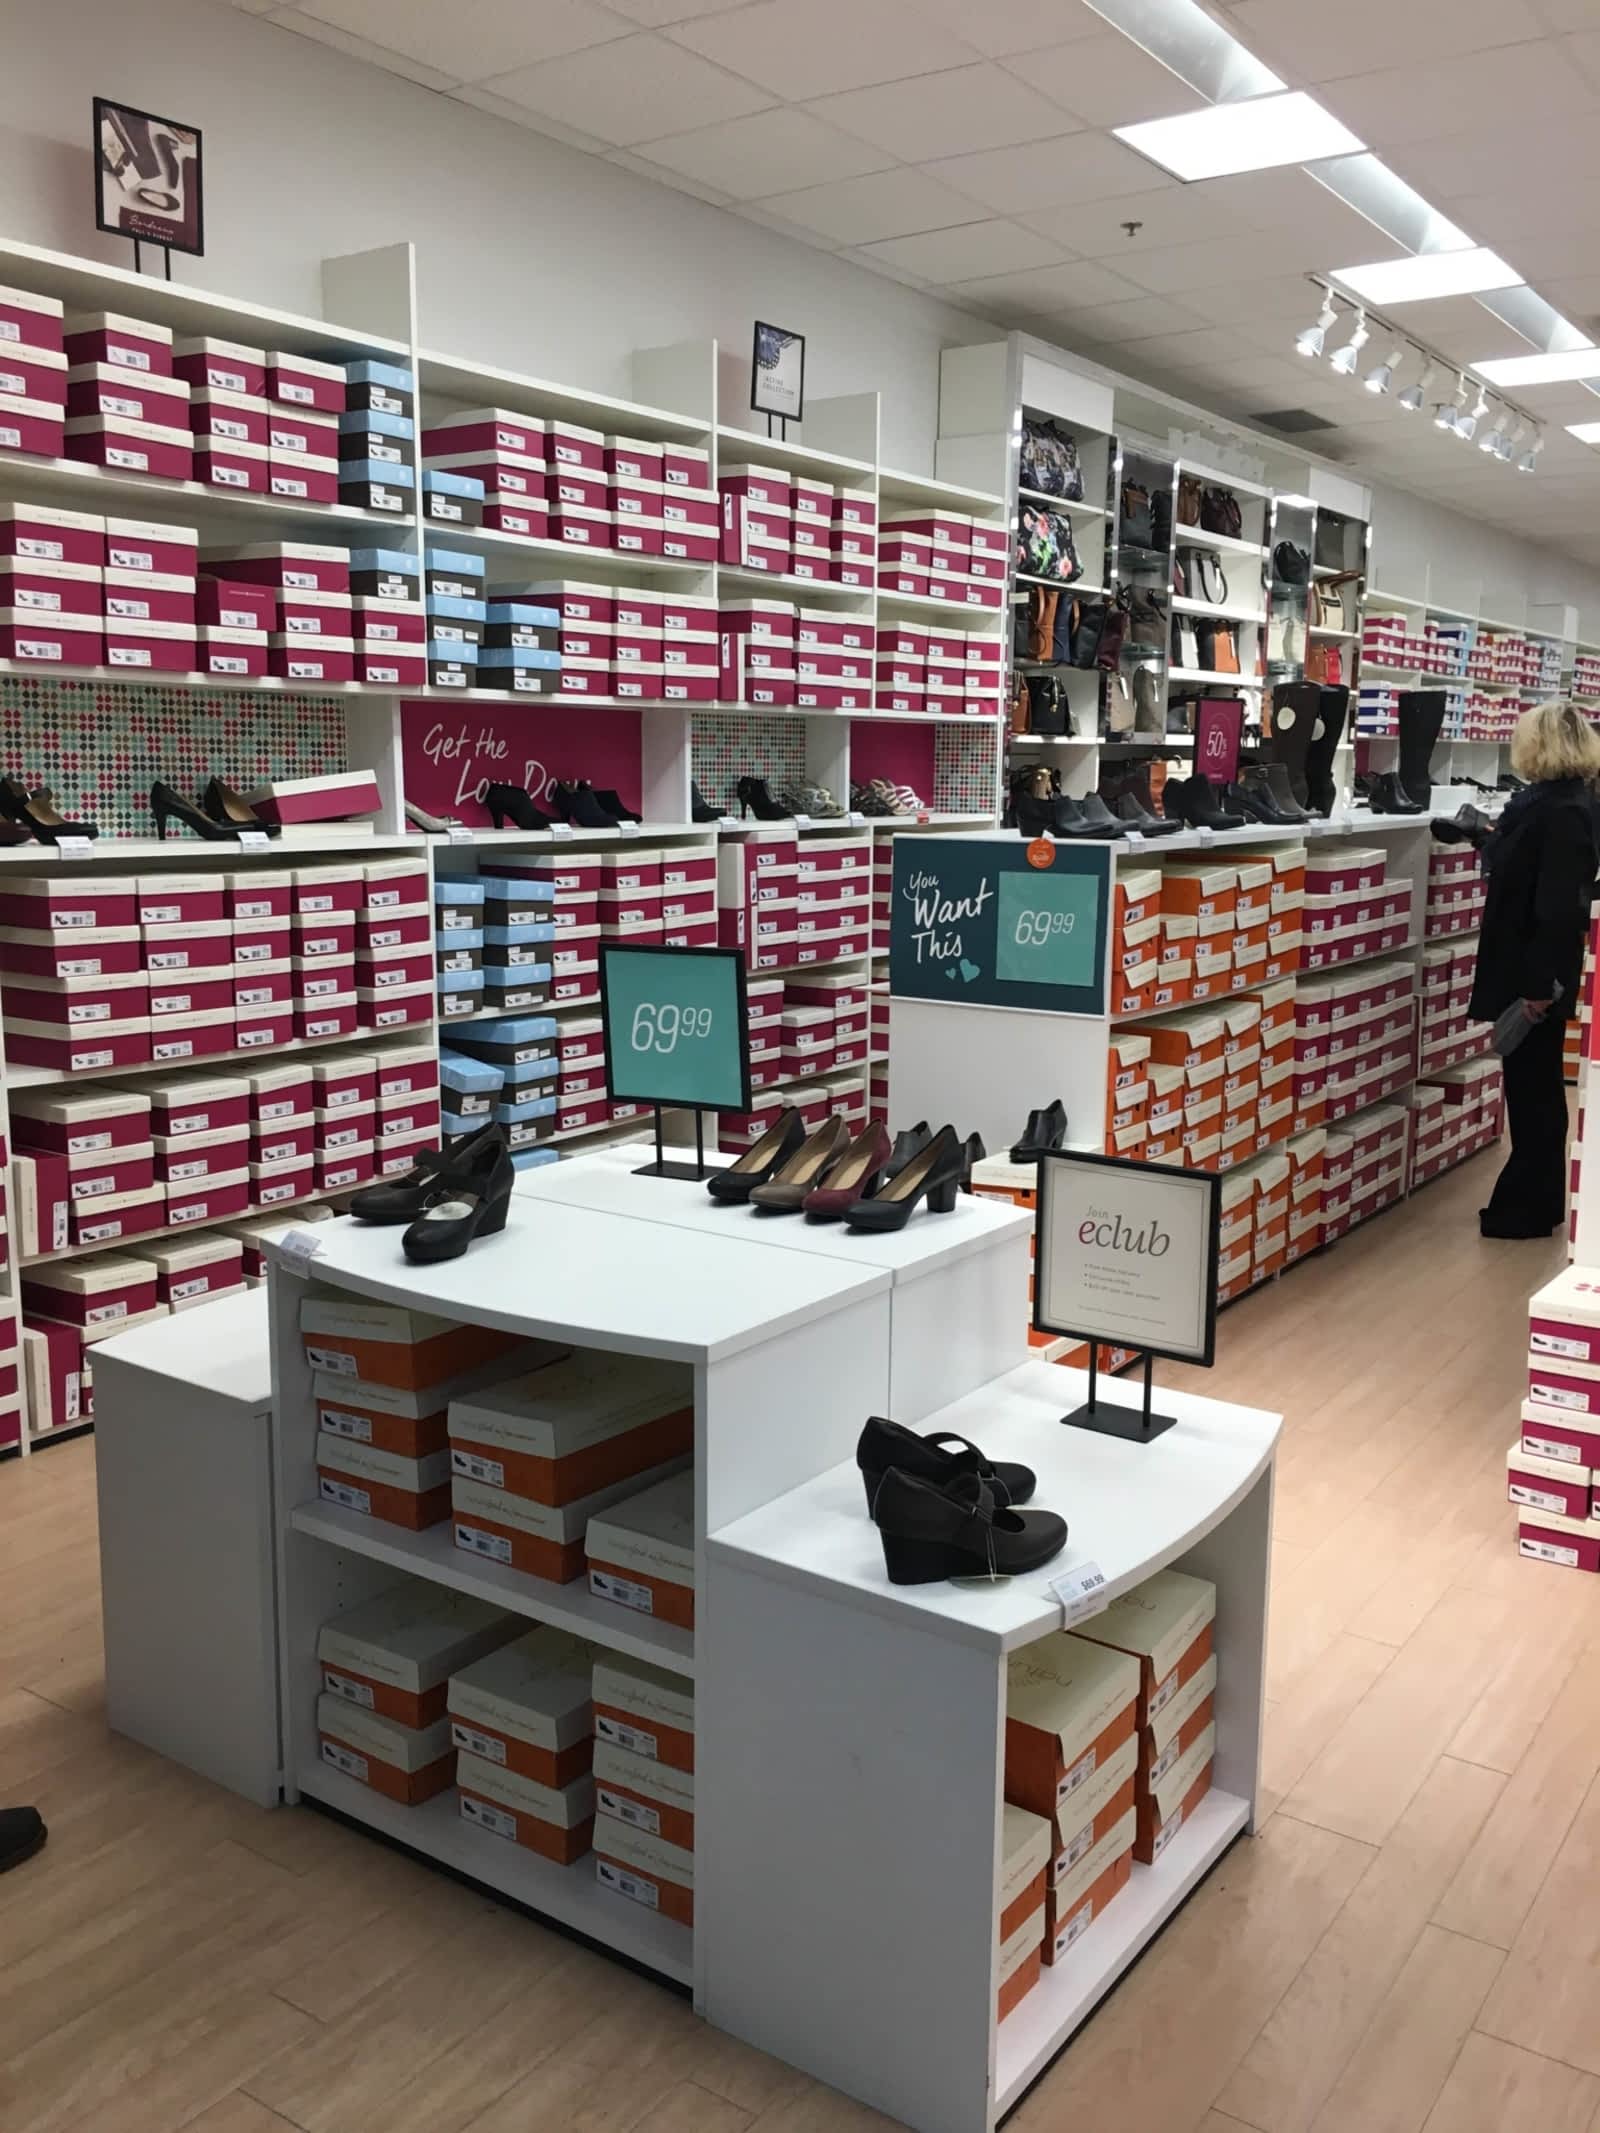 naturalizer shoe outlet locations